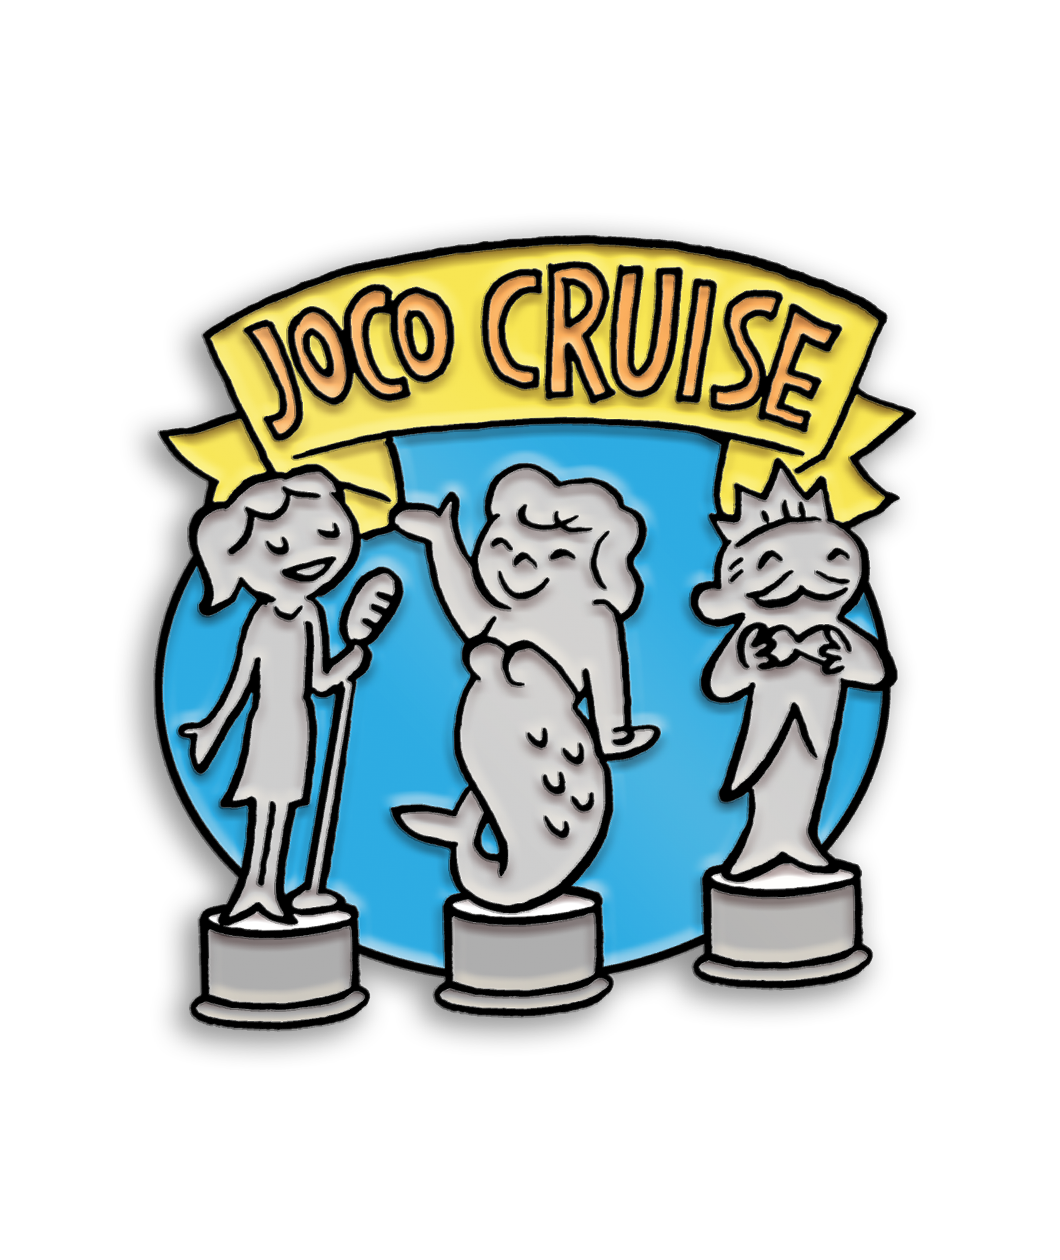 A pin showing a singer, a mermaid and a man with a crown on pedestals under a banner that says "Joco Cruise". 